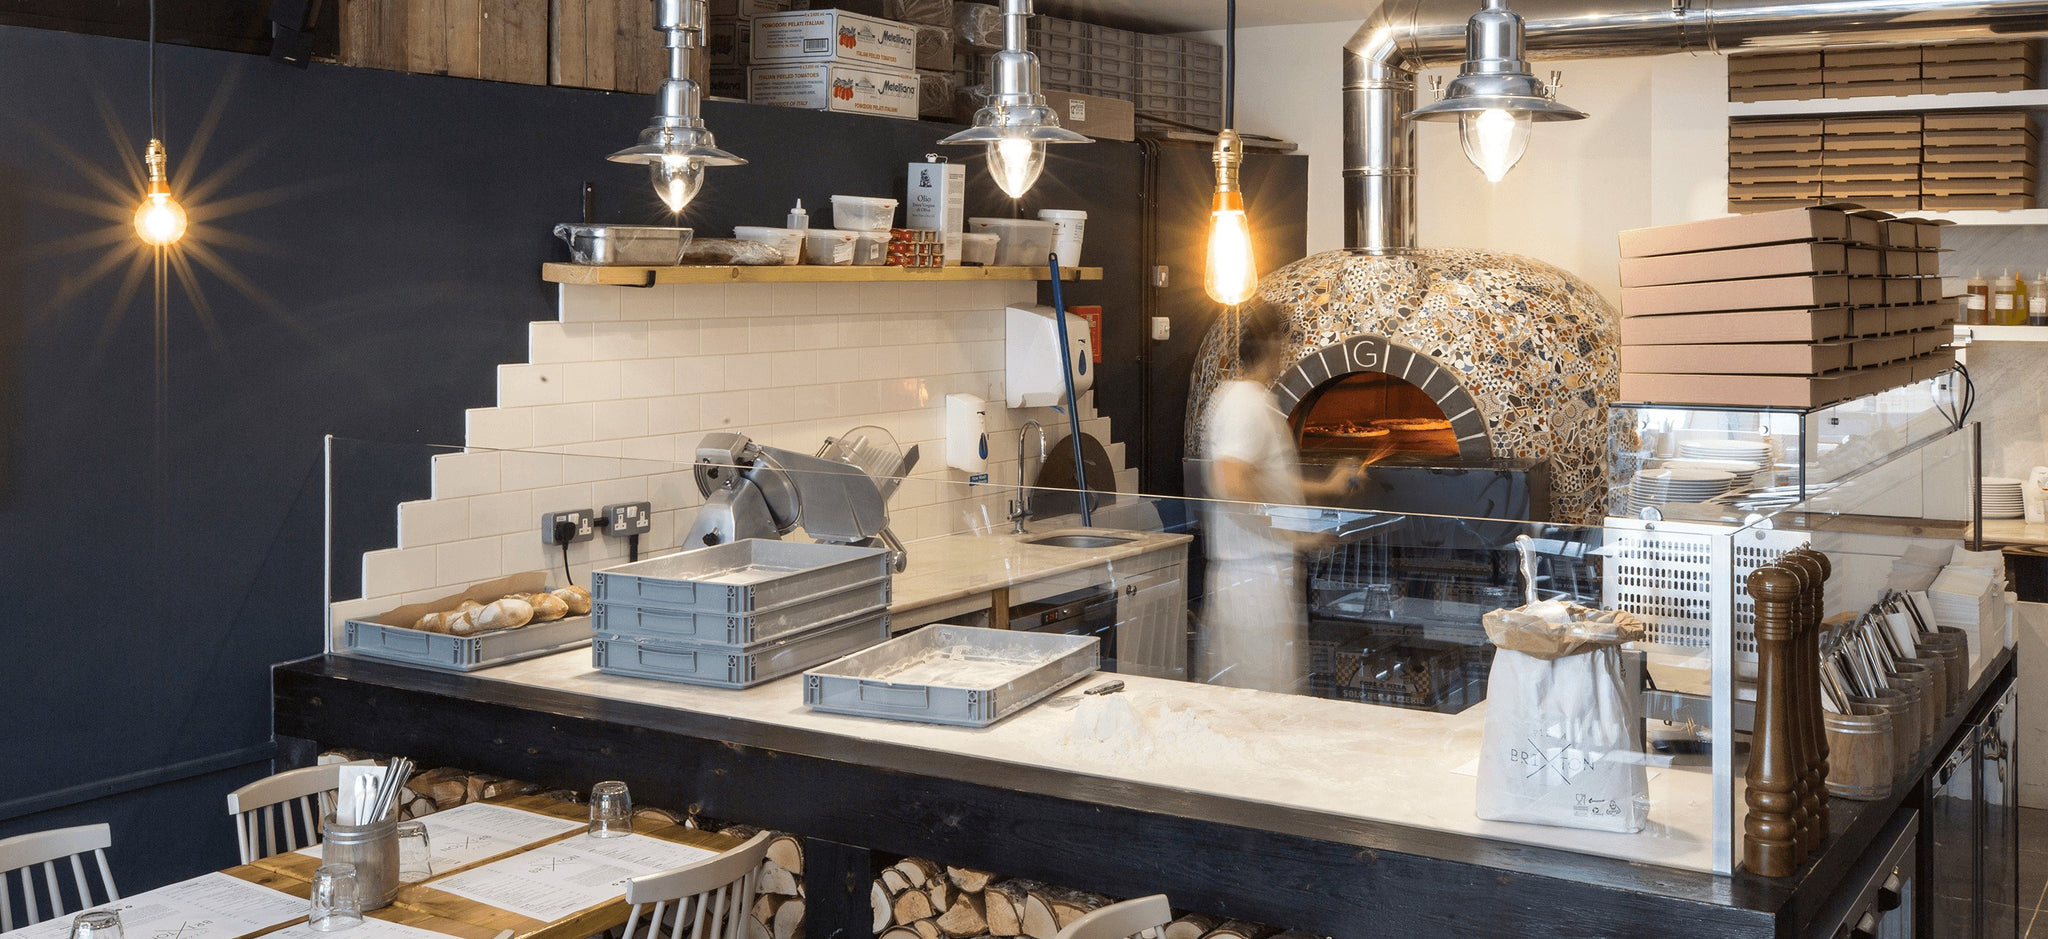 Commercial Pizza Ovens Gas Wood